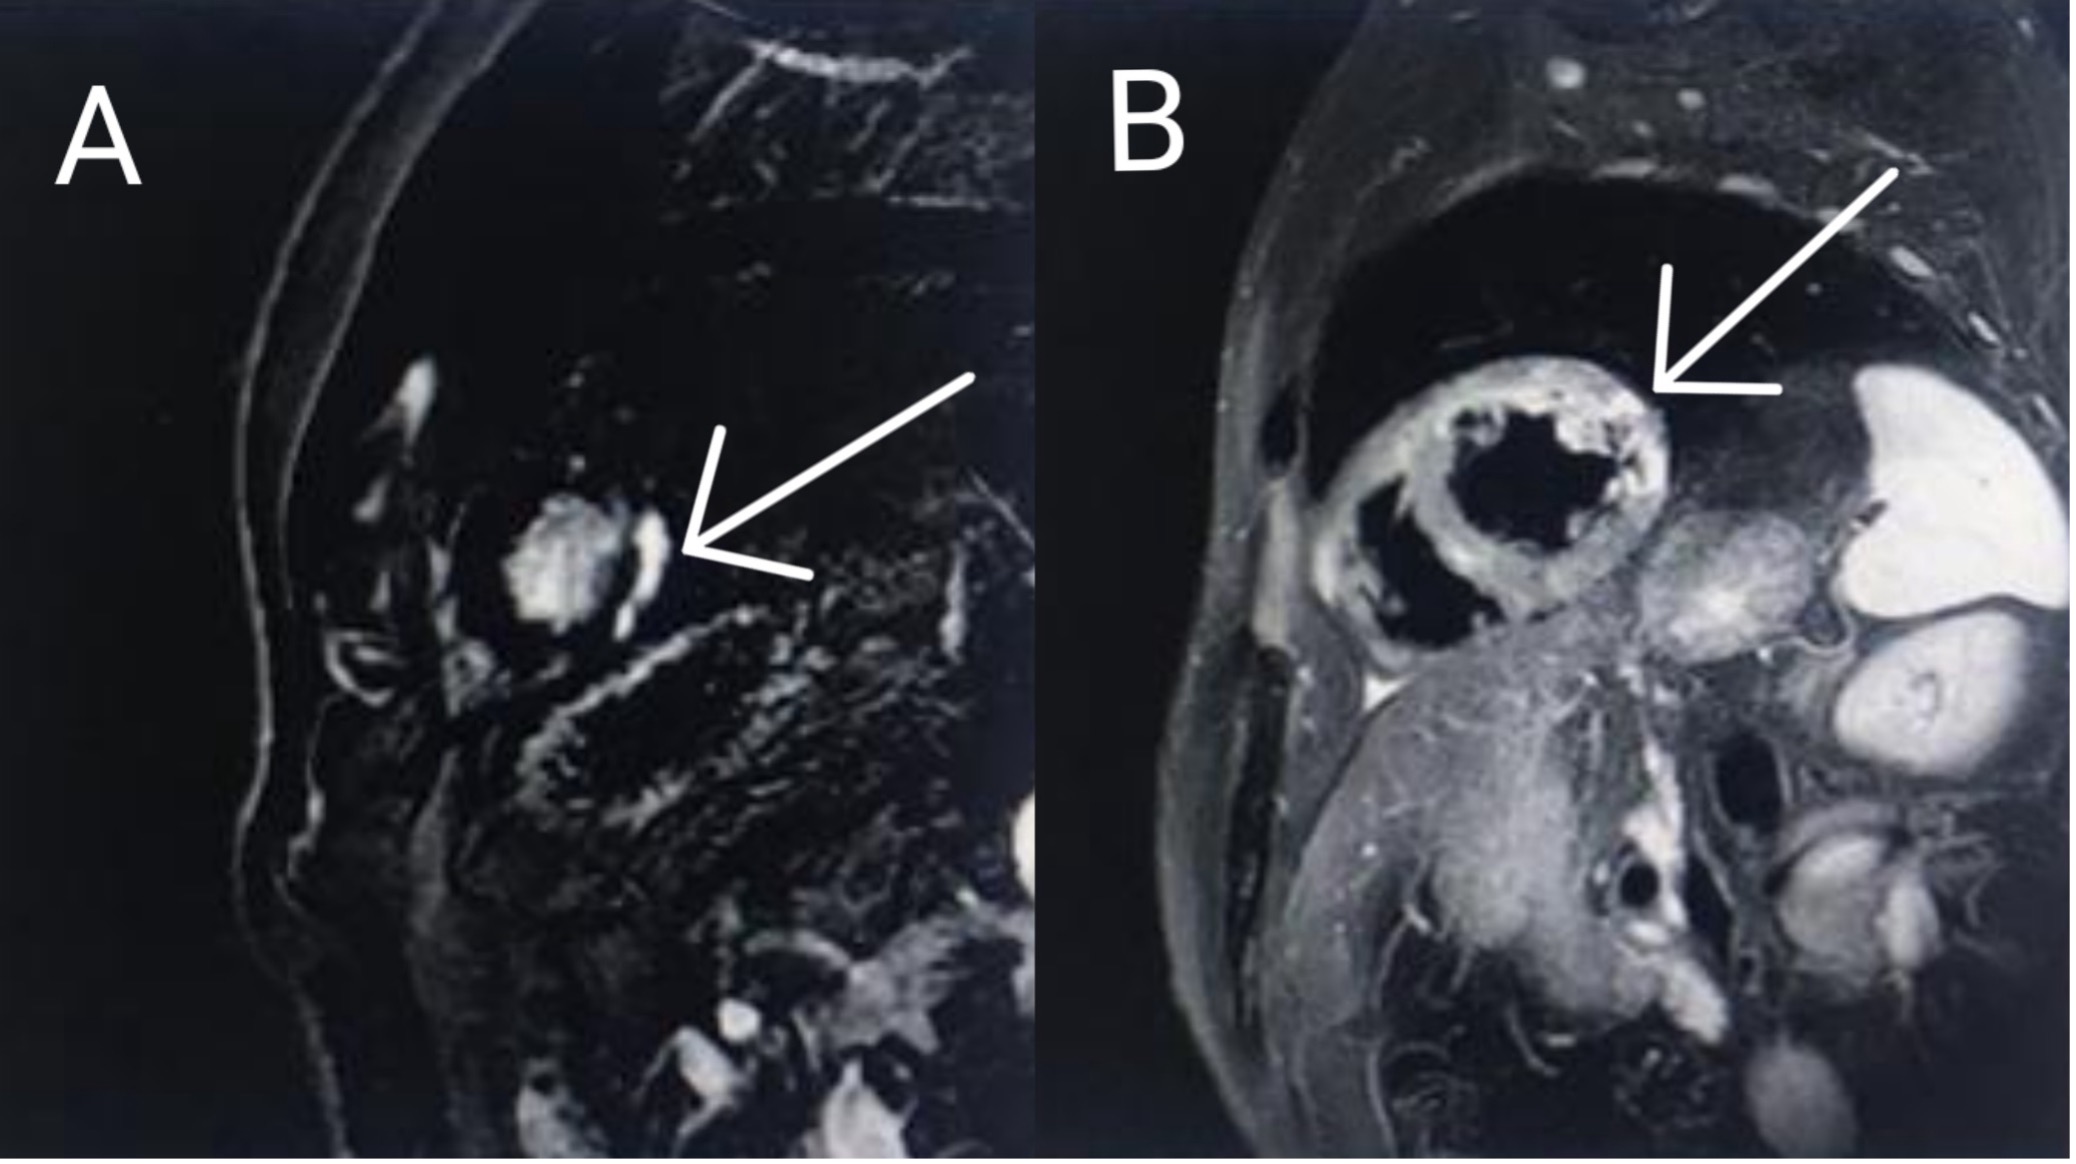 Cardiac magnetic resonance imaging. A: subepicardial lateral apical delayed gadolinium